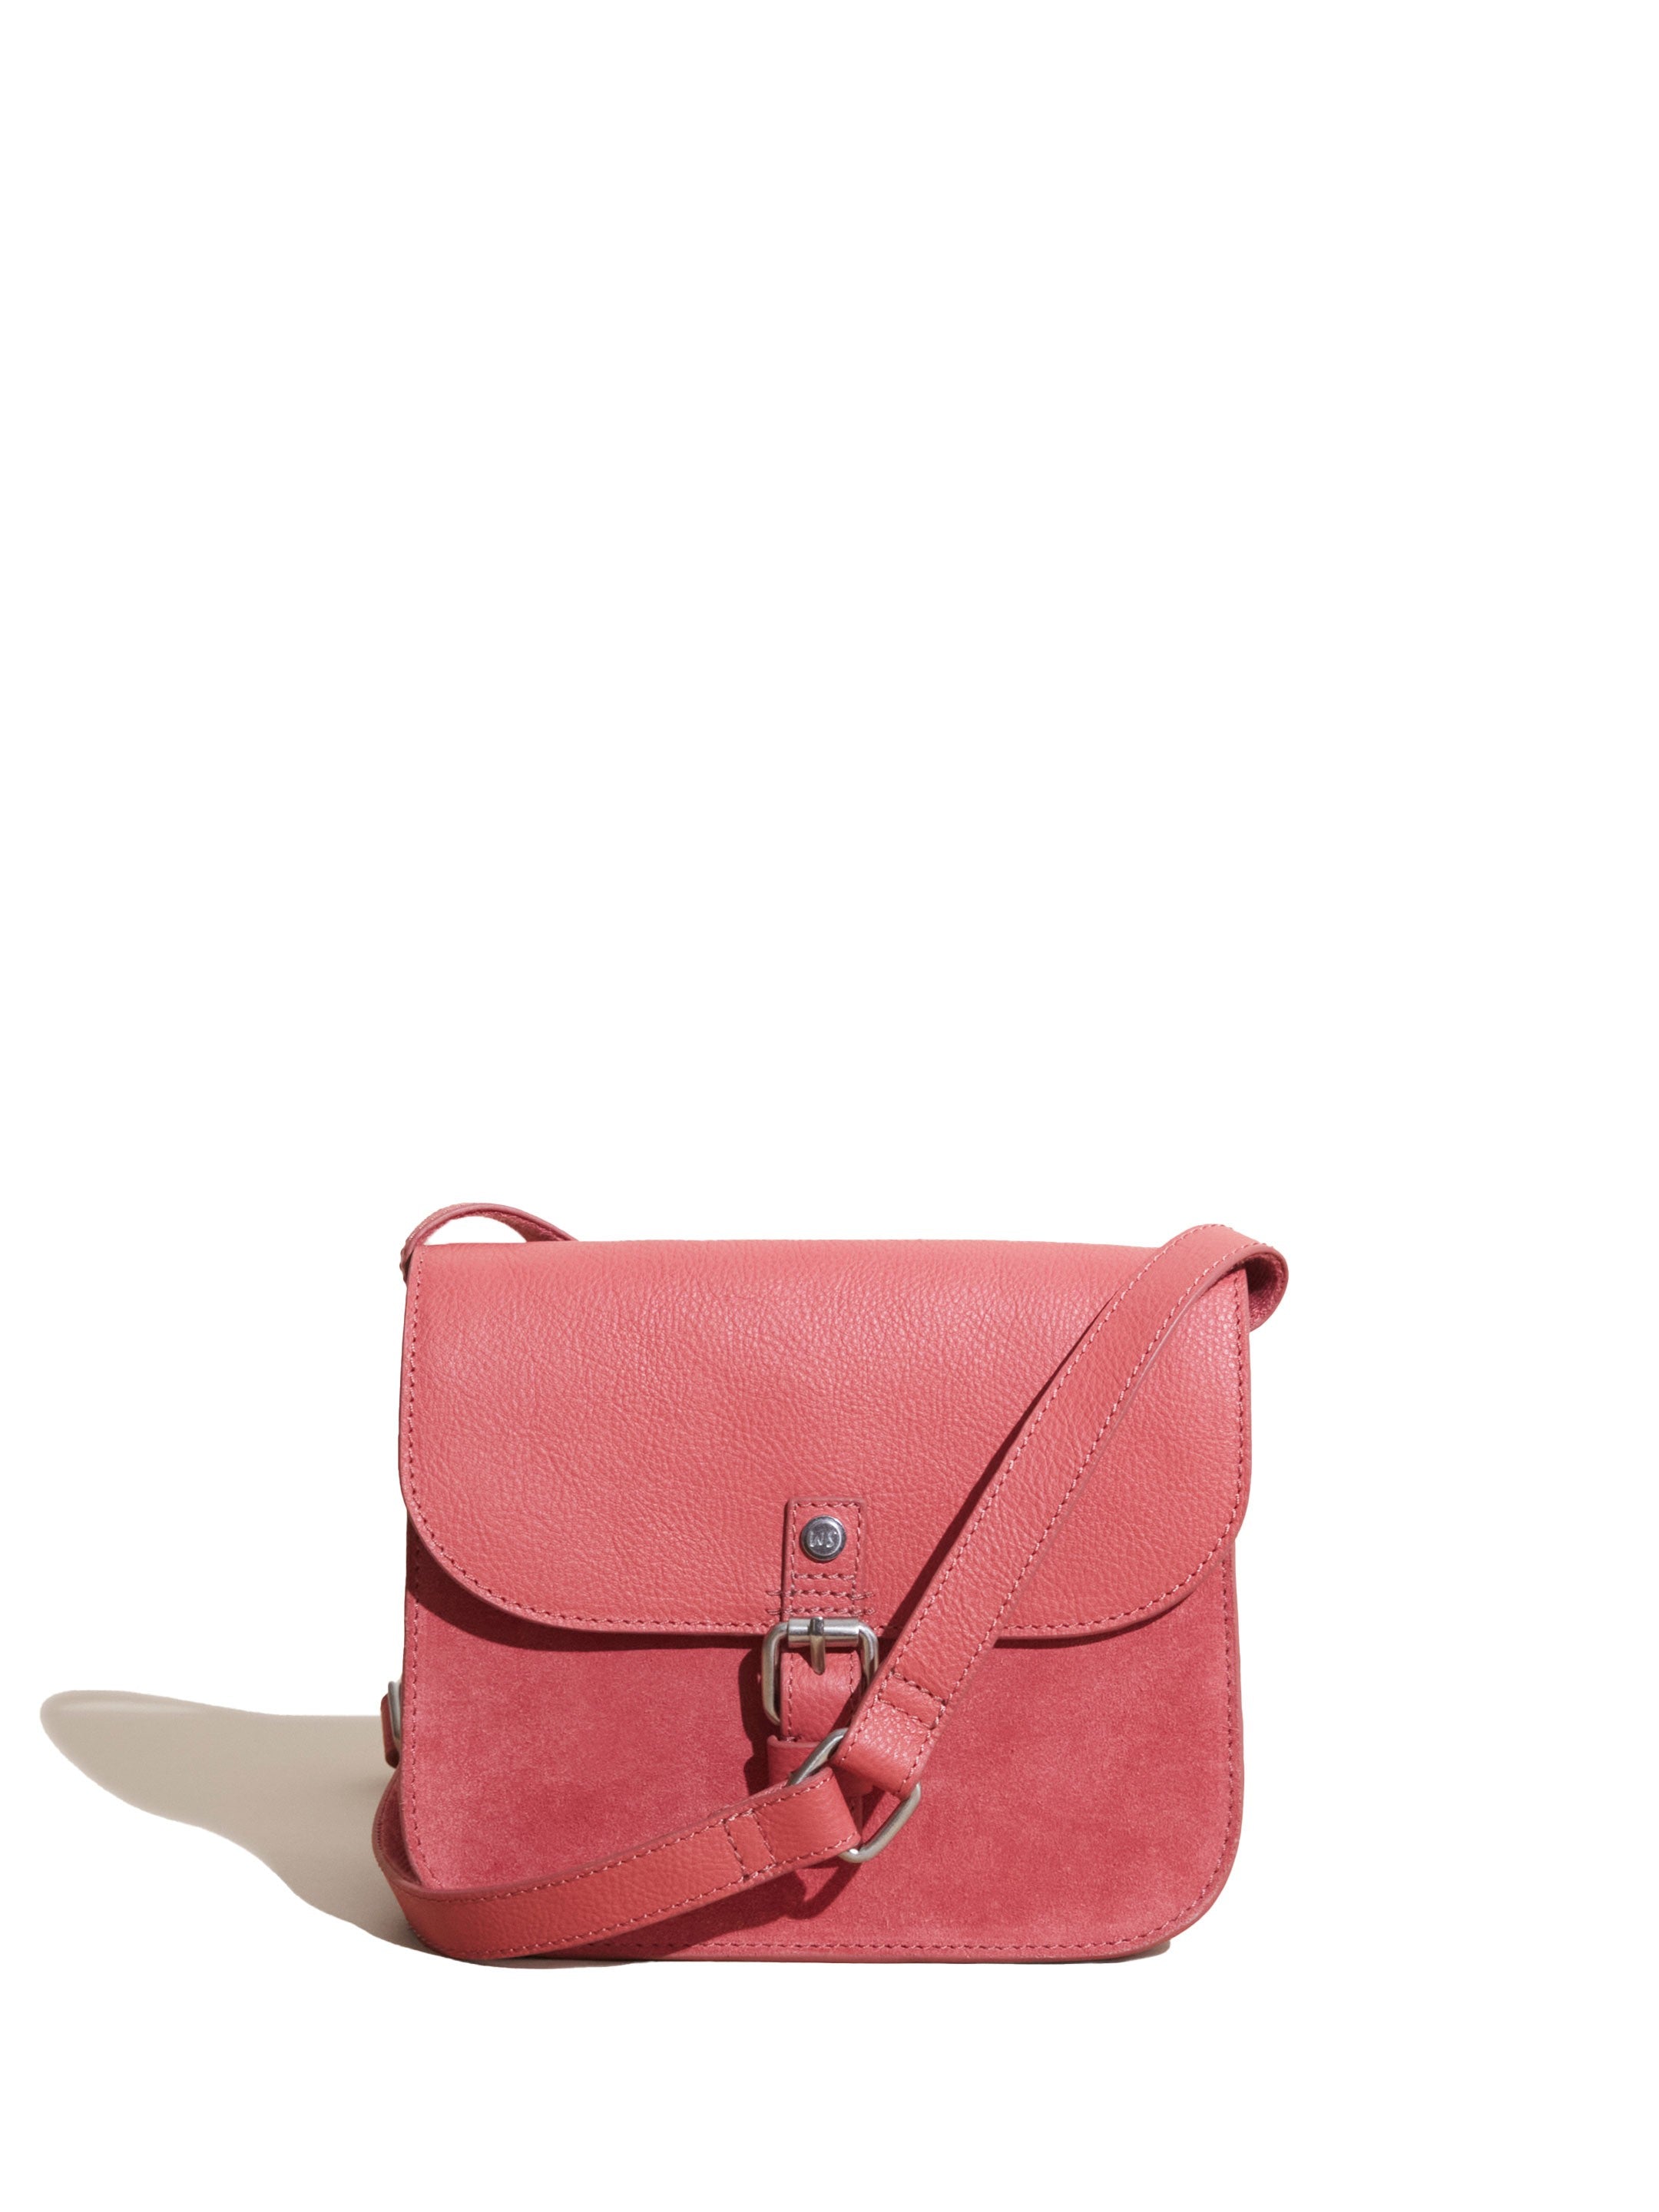 Light Pink Crossbody Clutch Bag - All About Eve at Home